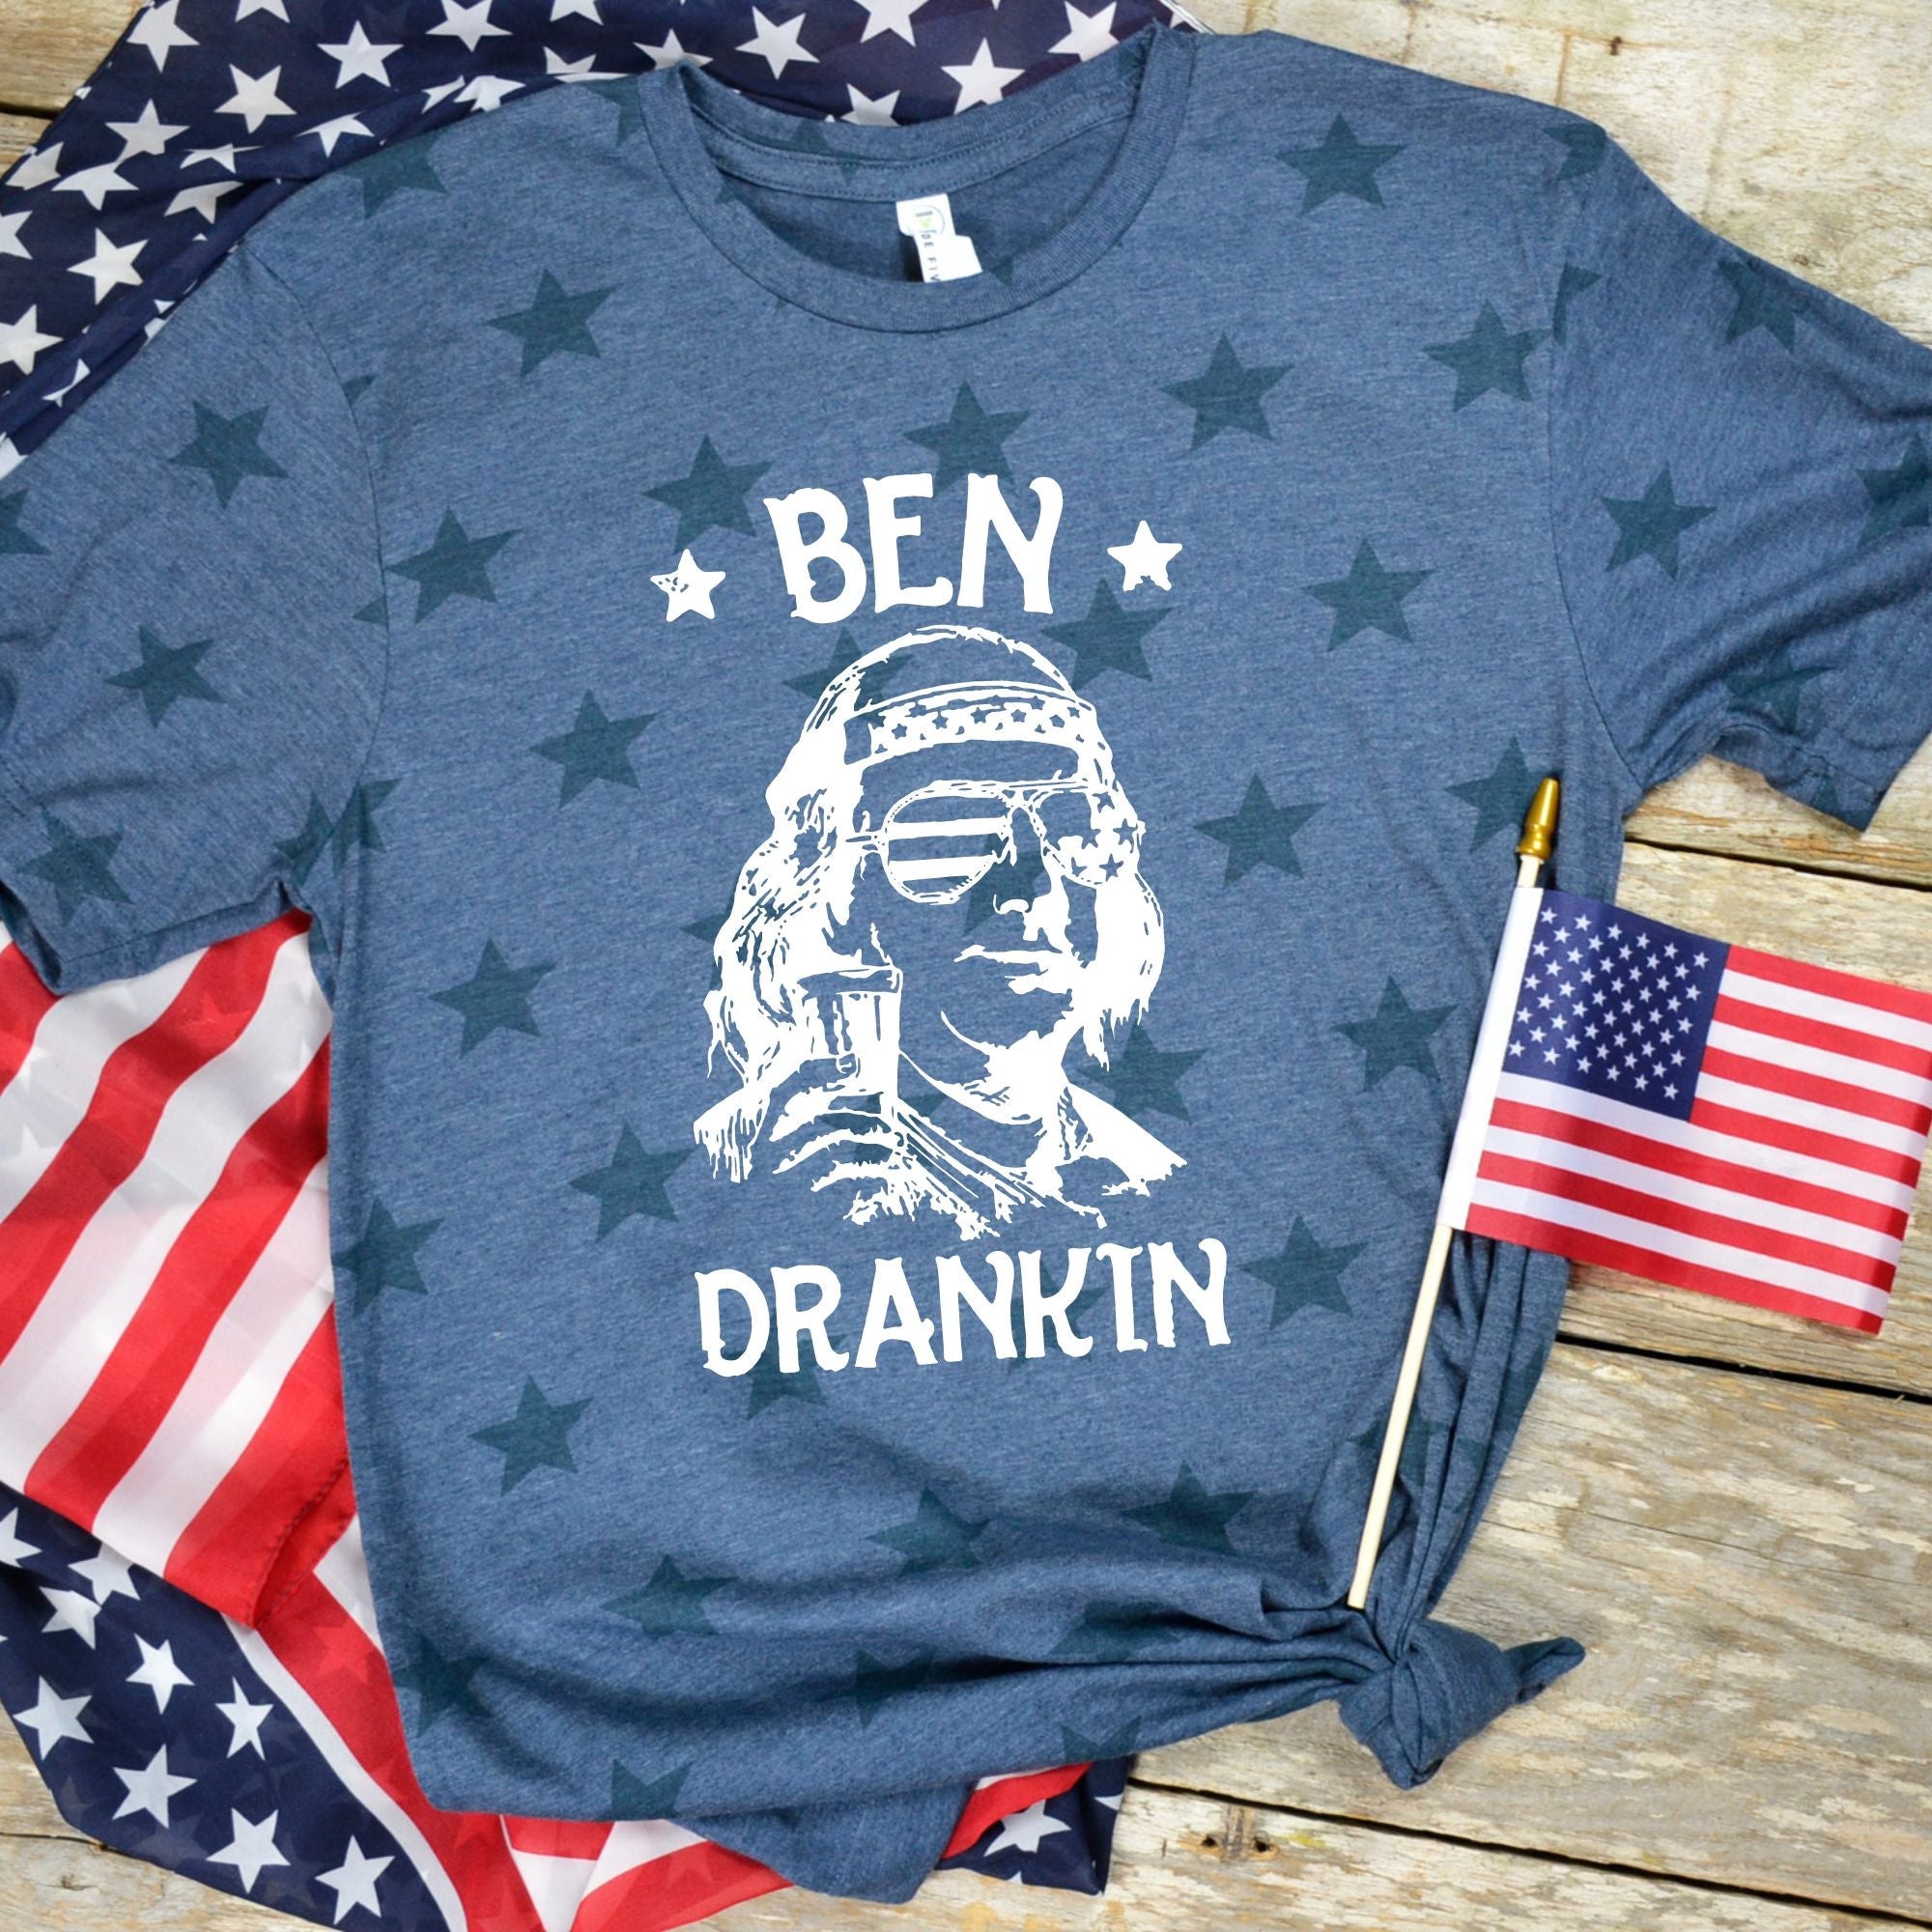 Ben Drankin T Shirt for 4th Of July *UNISEX FIT*-Graphic Tees-208 Tees Wholesale, Idaho